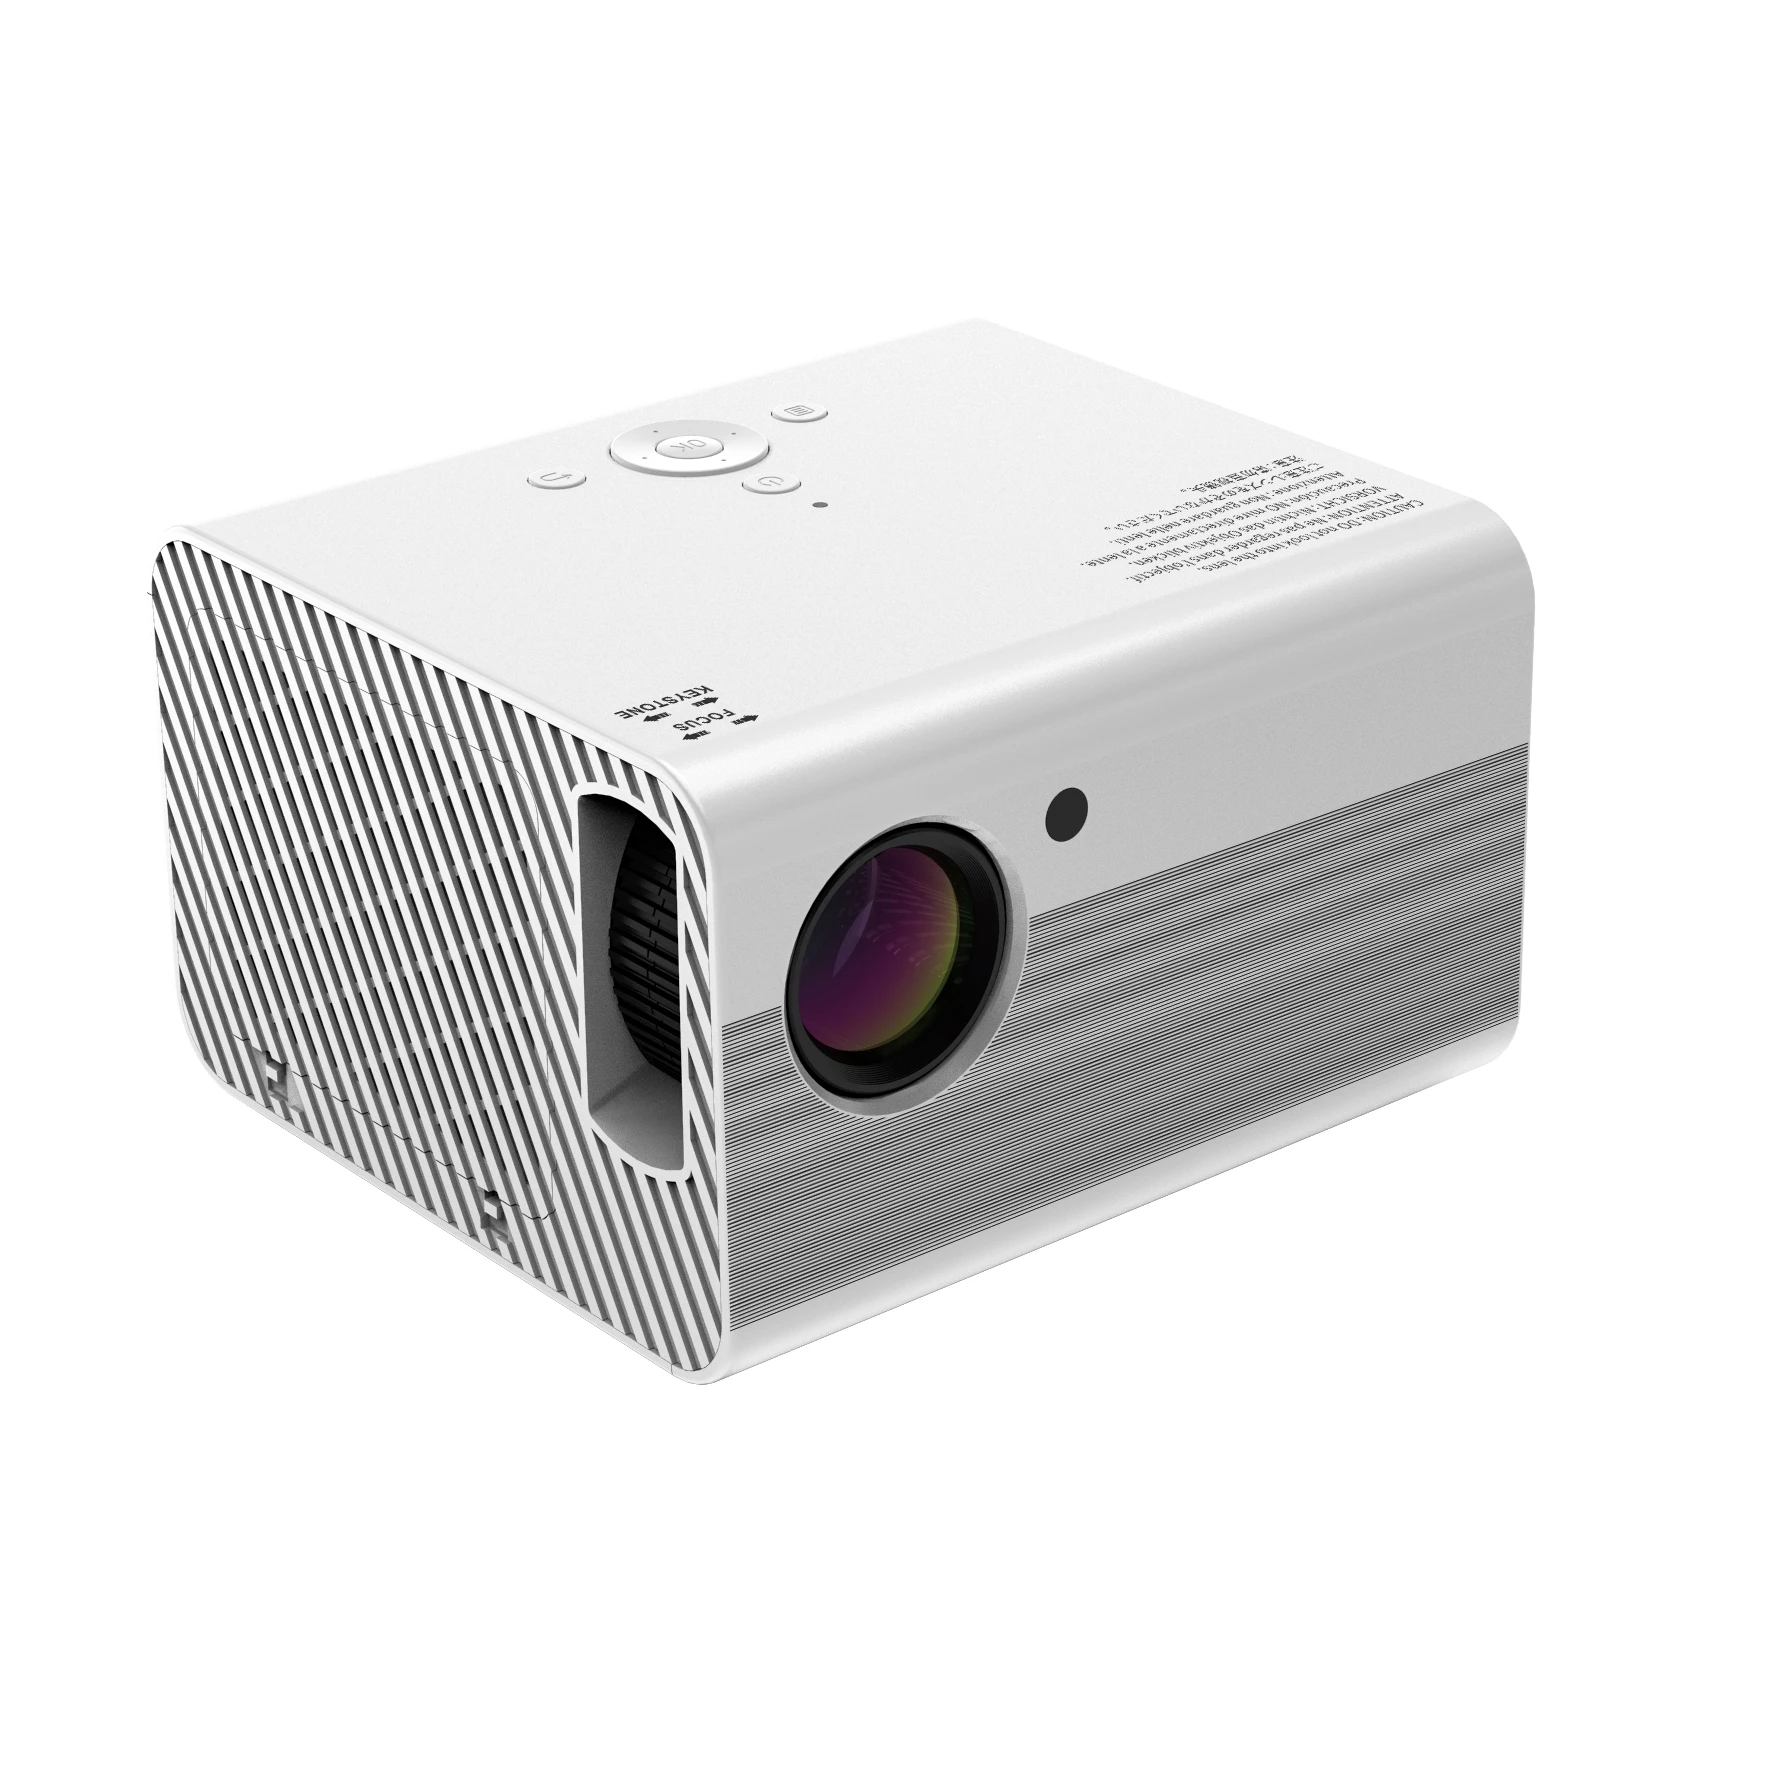 schrijven gunstig peddelen Mini Projector With Battery 4k Lcd Video 1080p Led Home Theater Projector  Mini Beamer 4k Best Small High Quality Projector - Buy Mini Beamer 4k,Mini  Projector 4k,Projector Phone Product on Alibaba.com